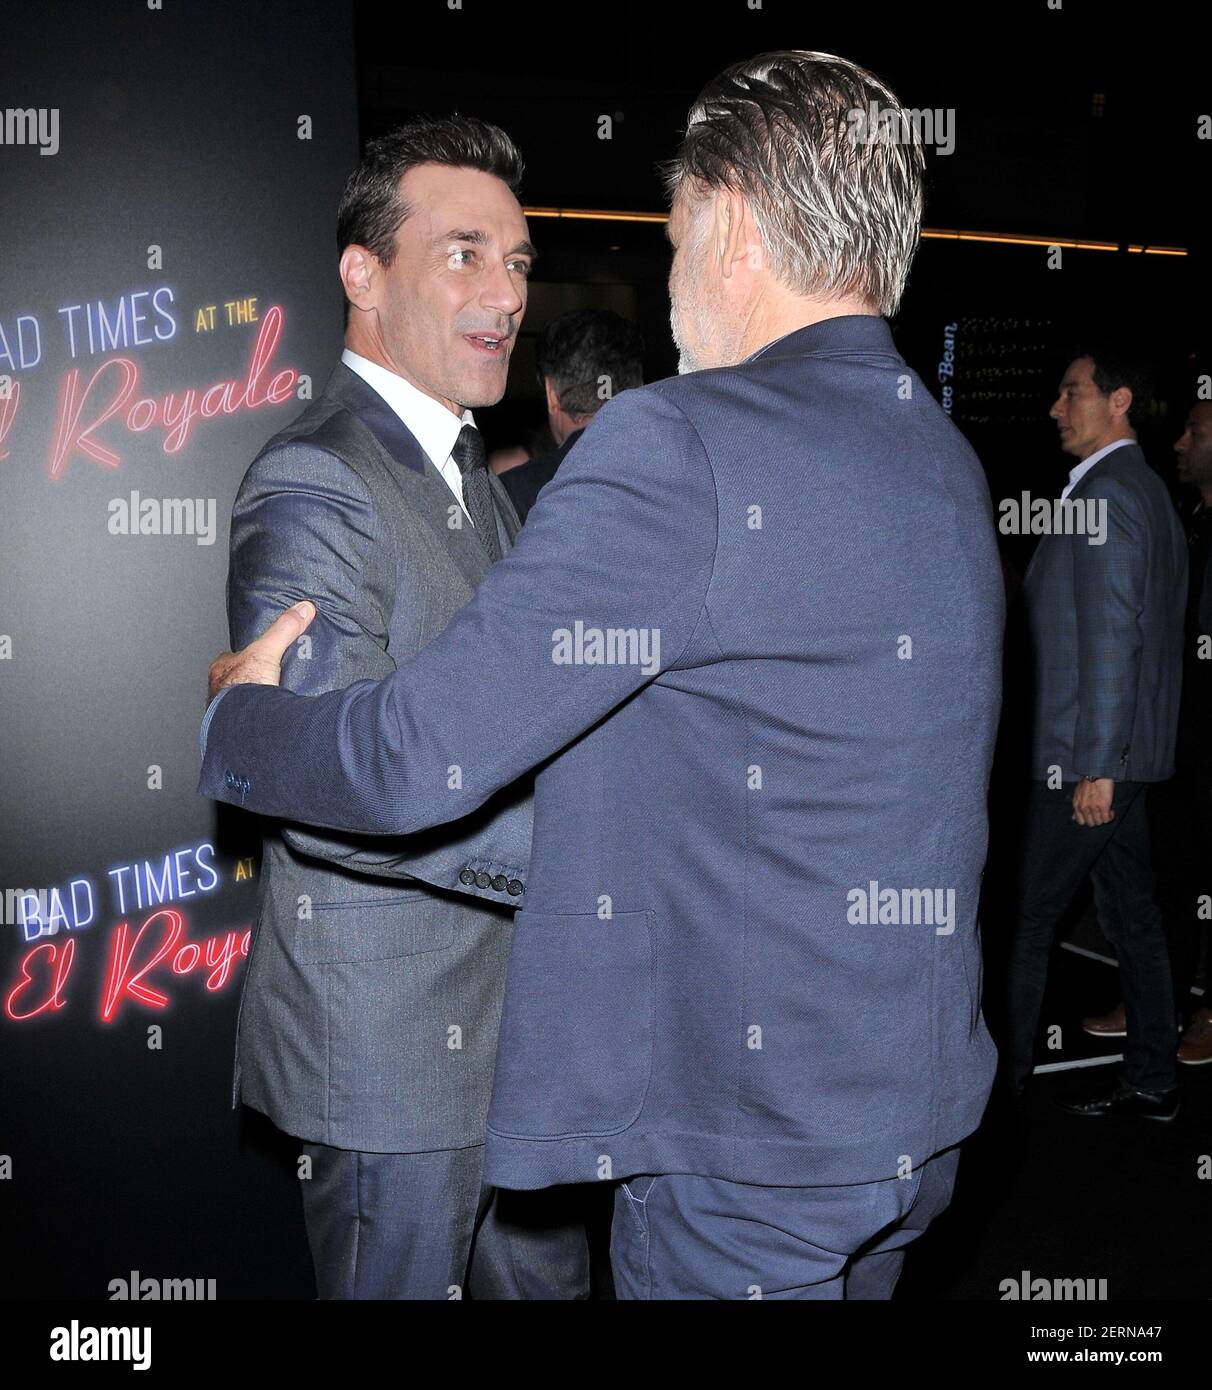 L-R) Jon Hamm and Bill Pullman at the "Bad Times At The El Royale" Los  Angeles Premiere held at the TCL Chinese Theater in Hollywood, CA on  Saturday, September 22, 2018. (Photo